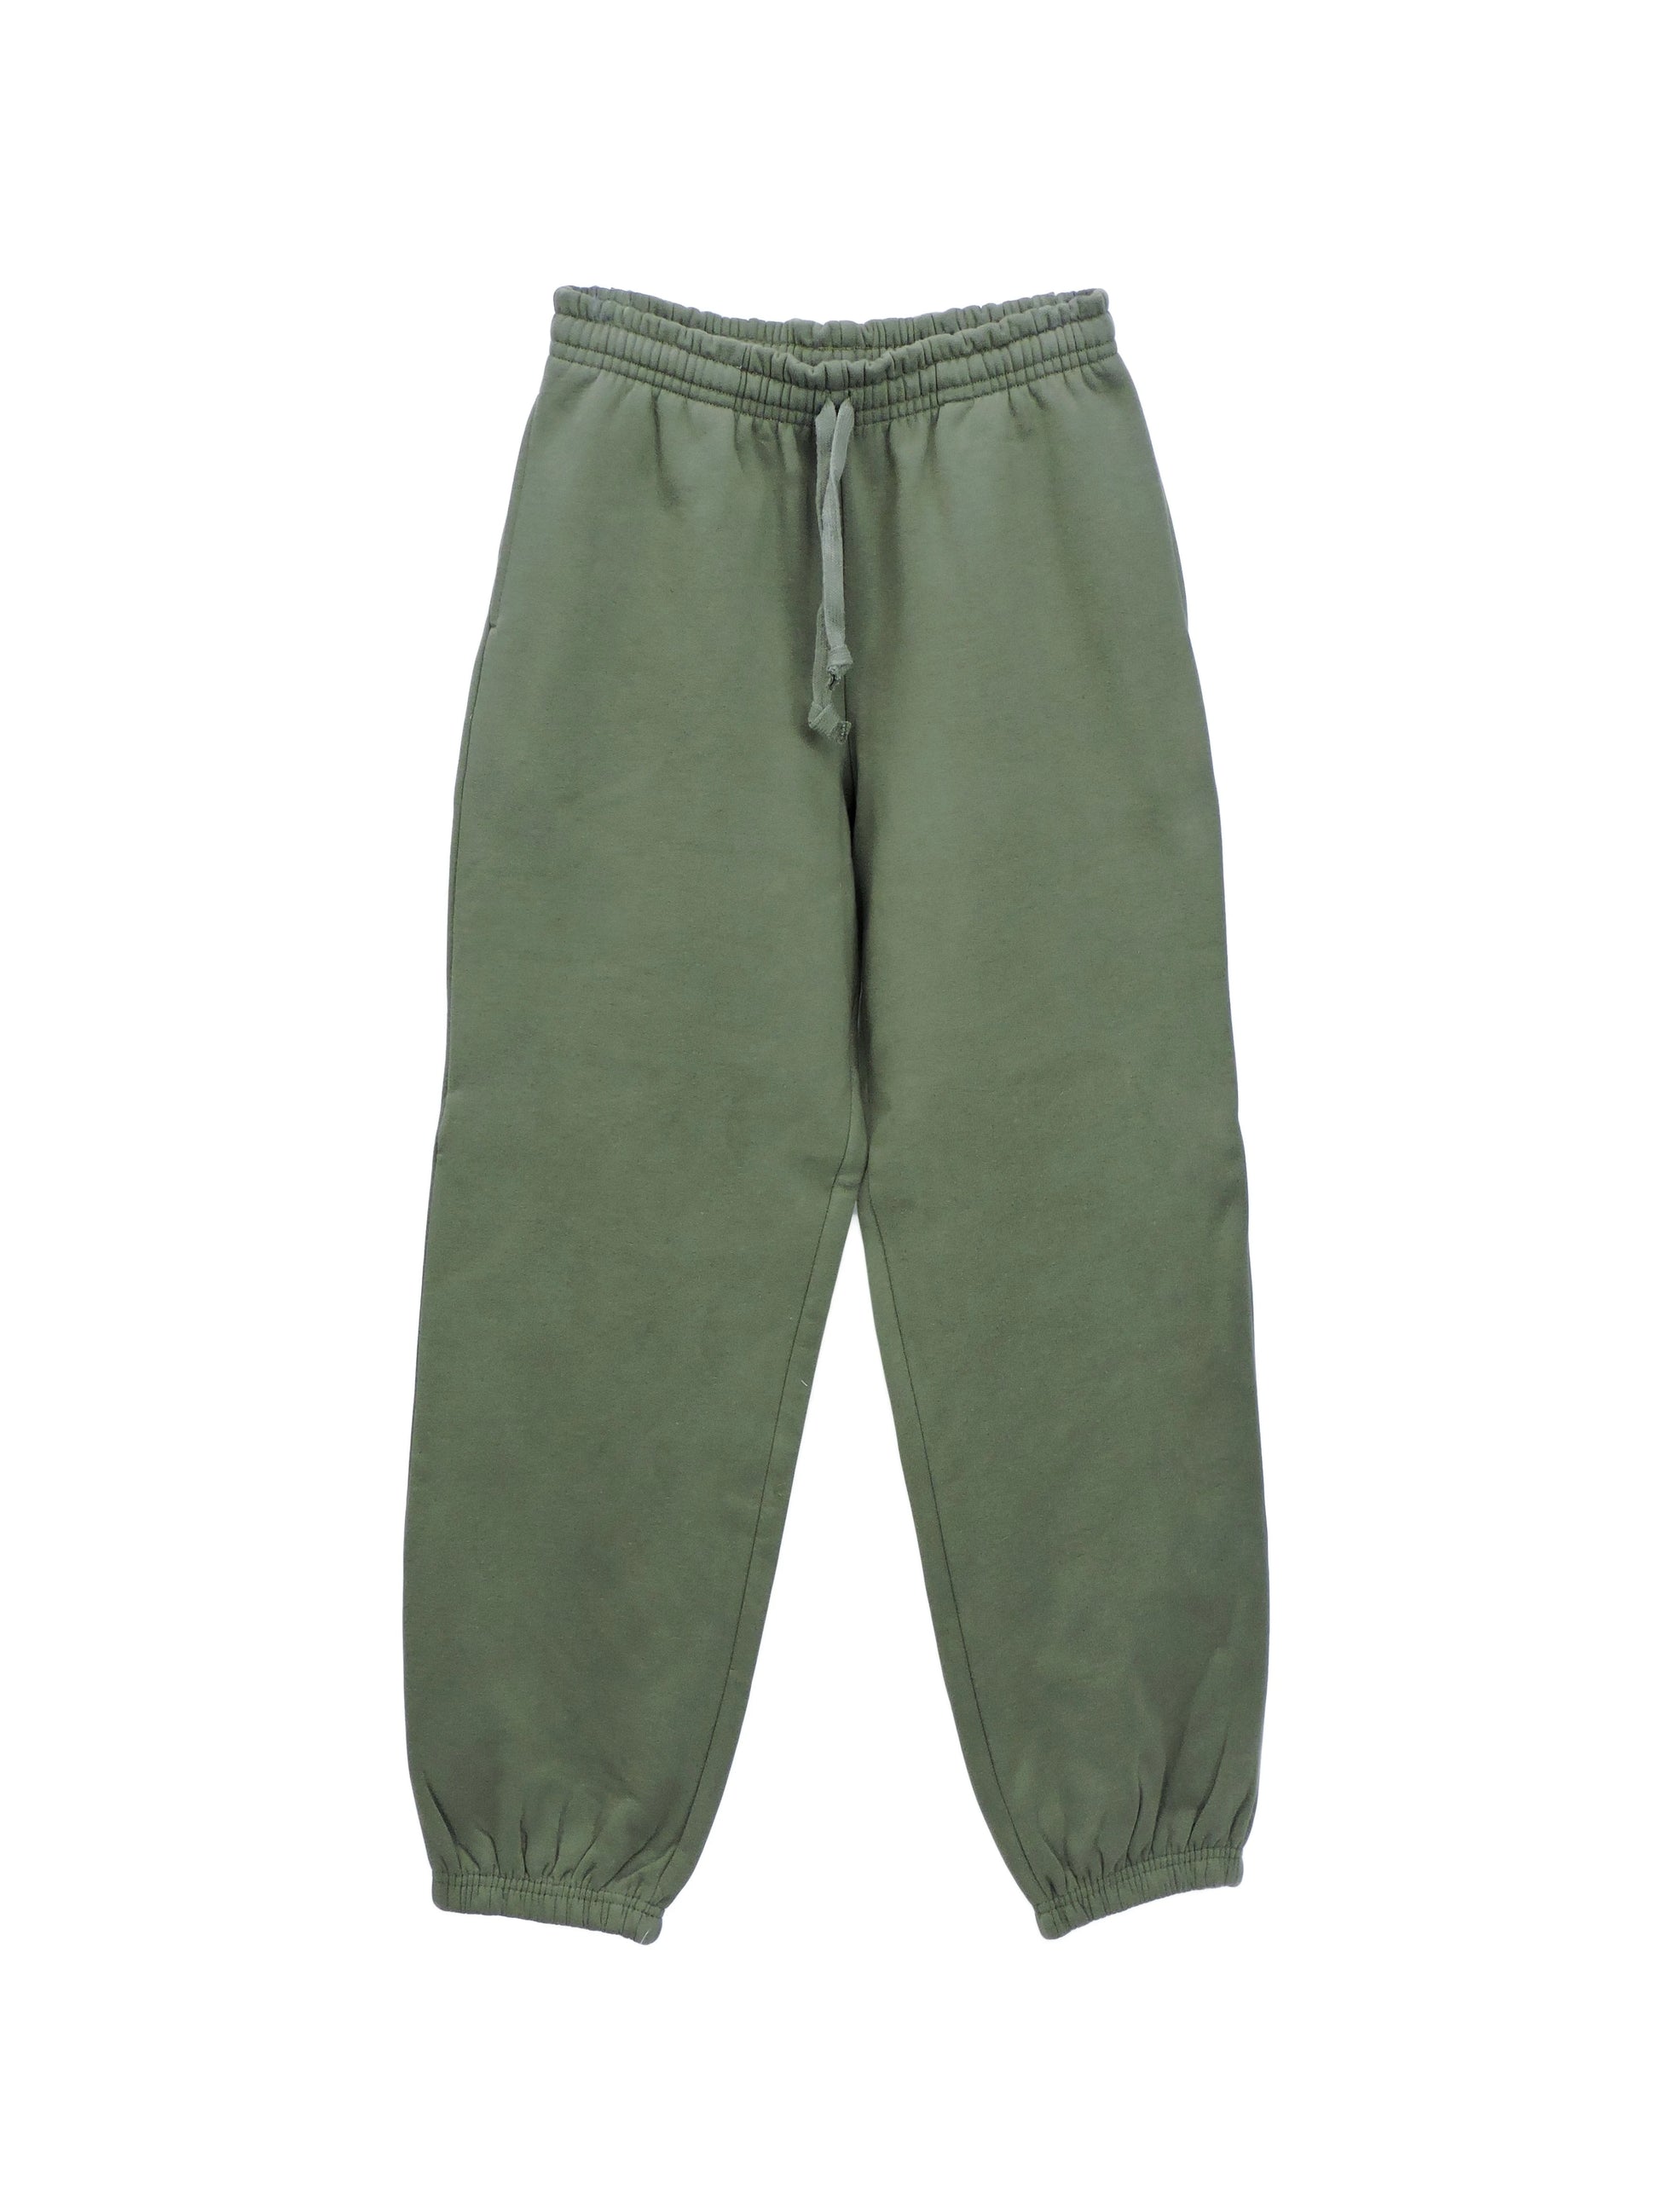 Olive Green Fleece Sweatpants with drawstrings and elastic ankle cuffs